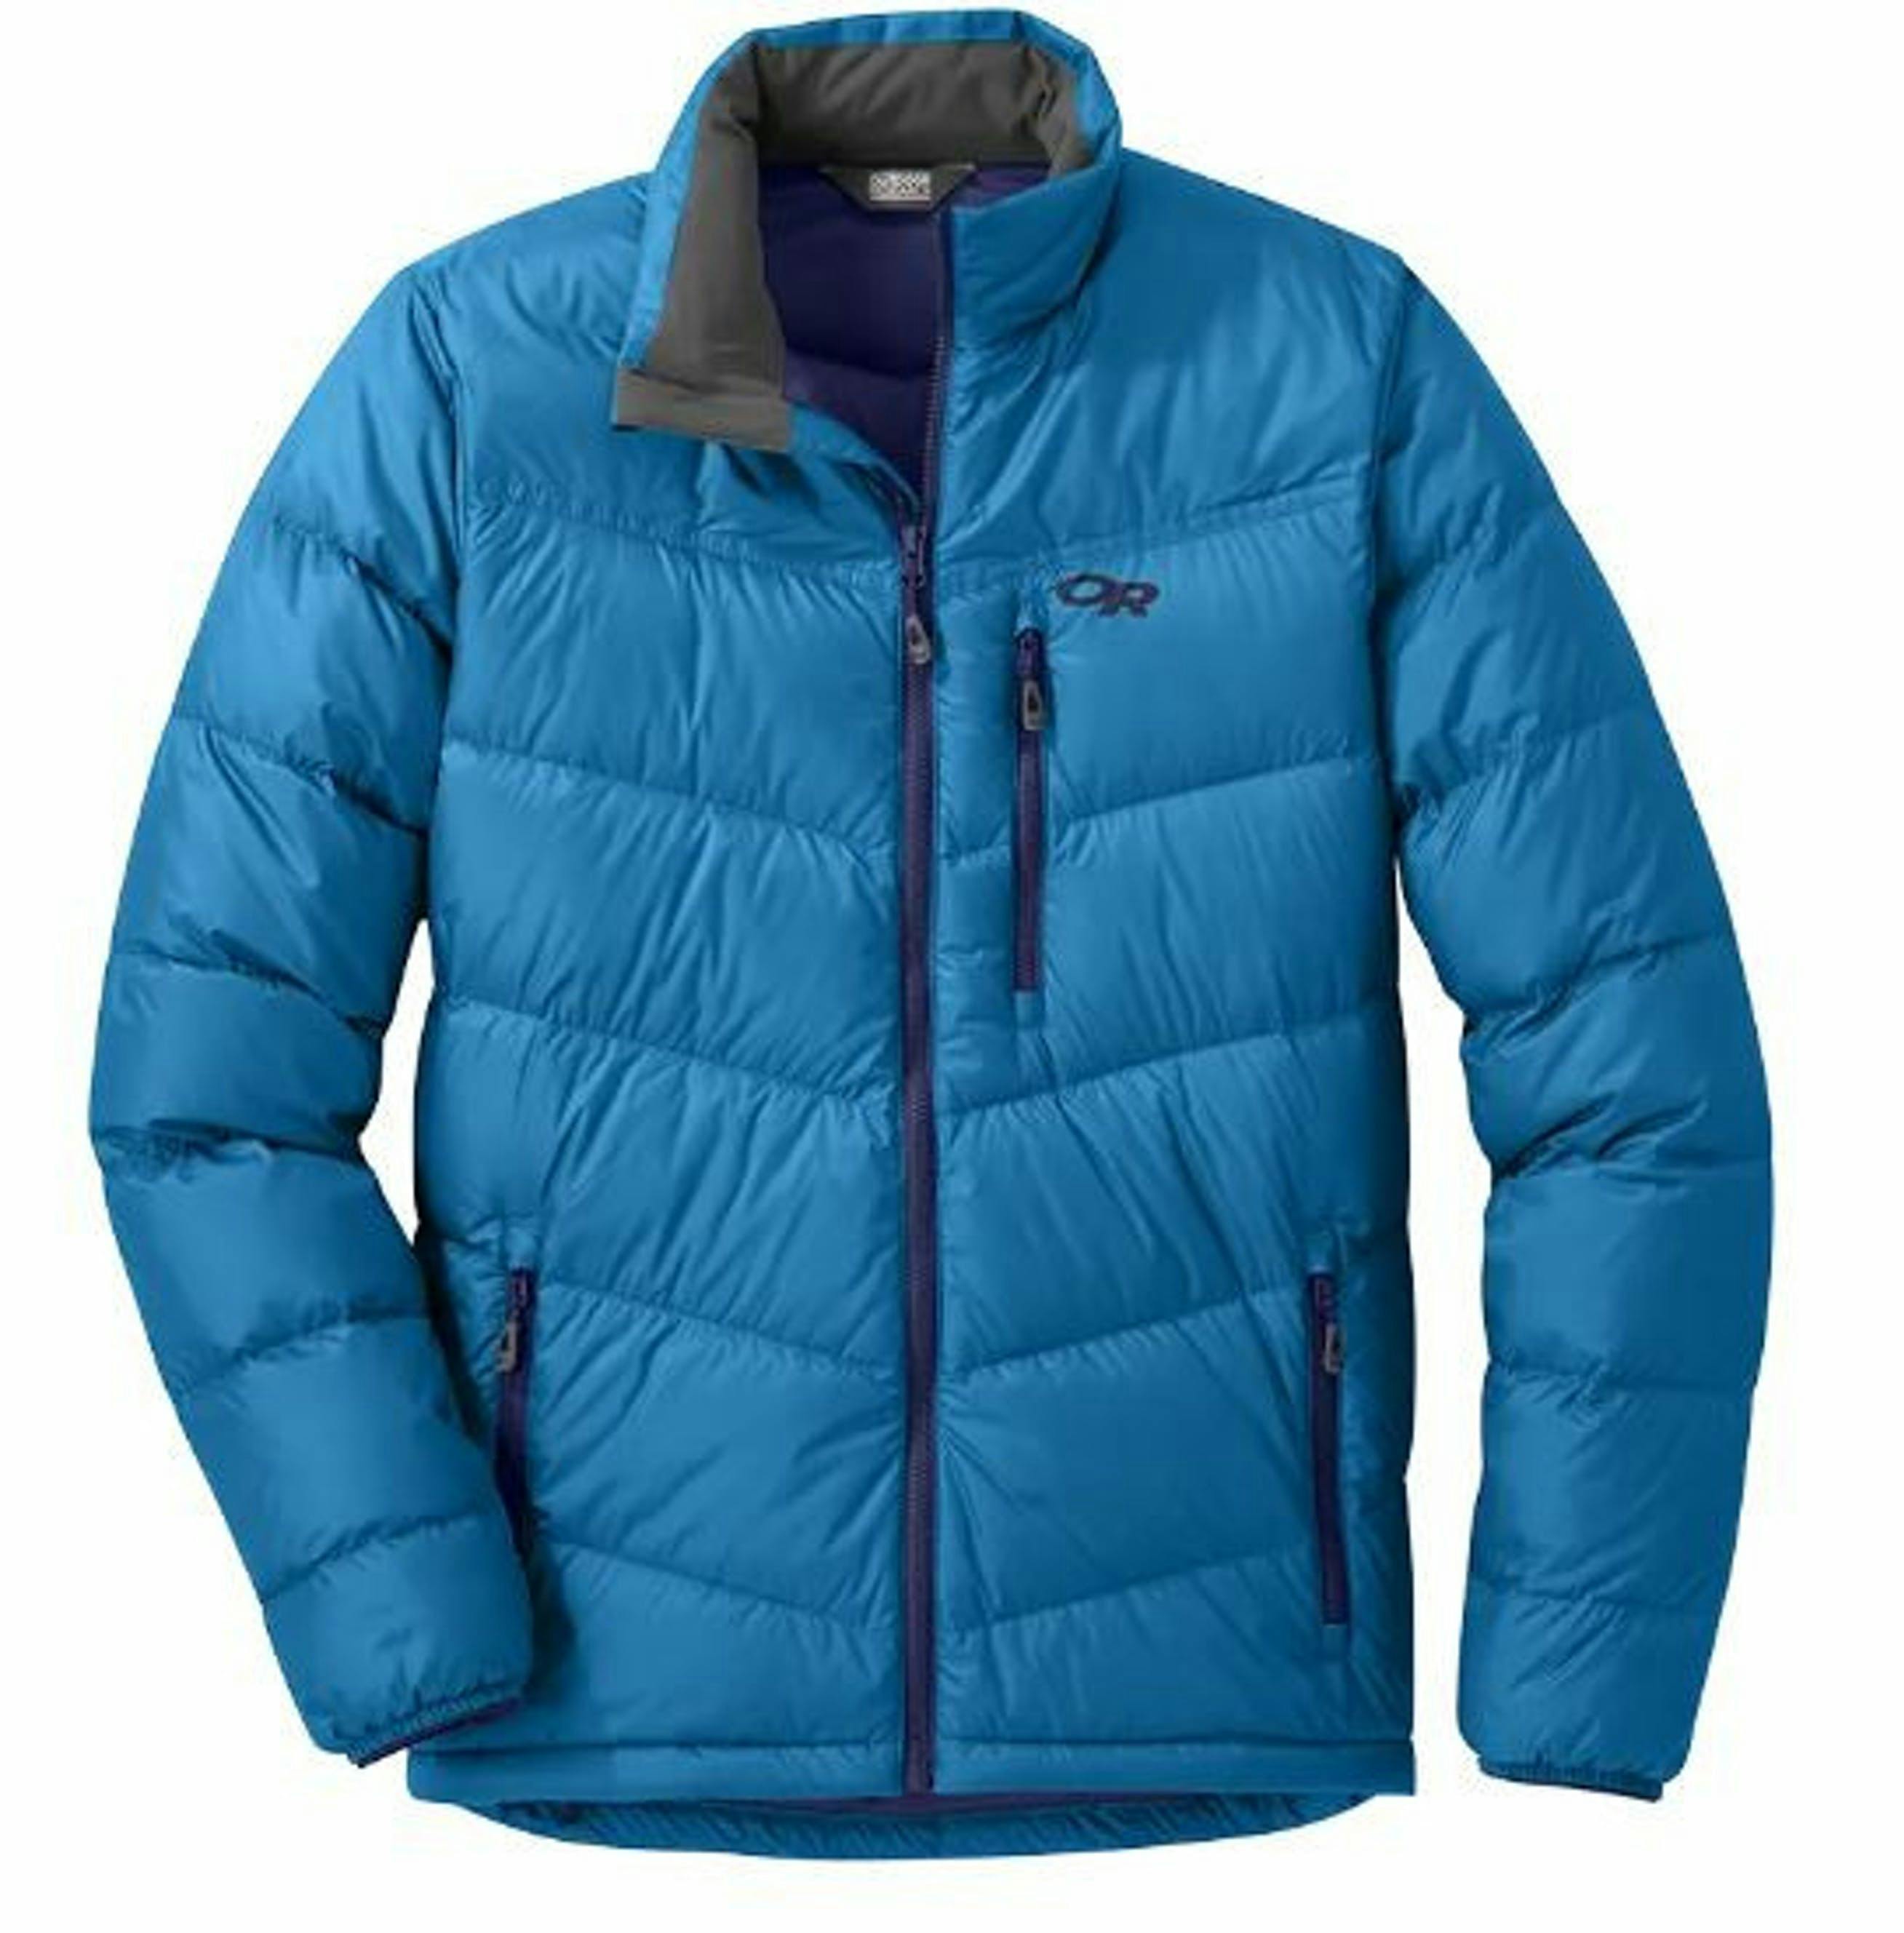 Product image of the Outdoor Research Transcendent Down Jacket in Cascade blue.